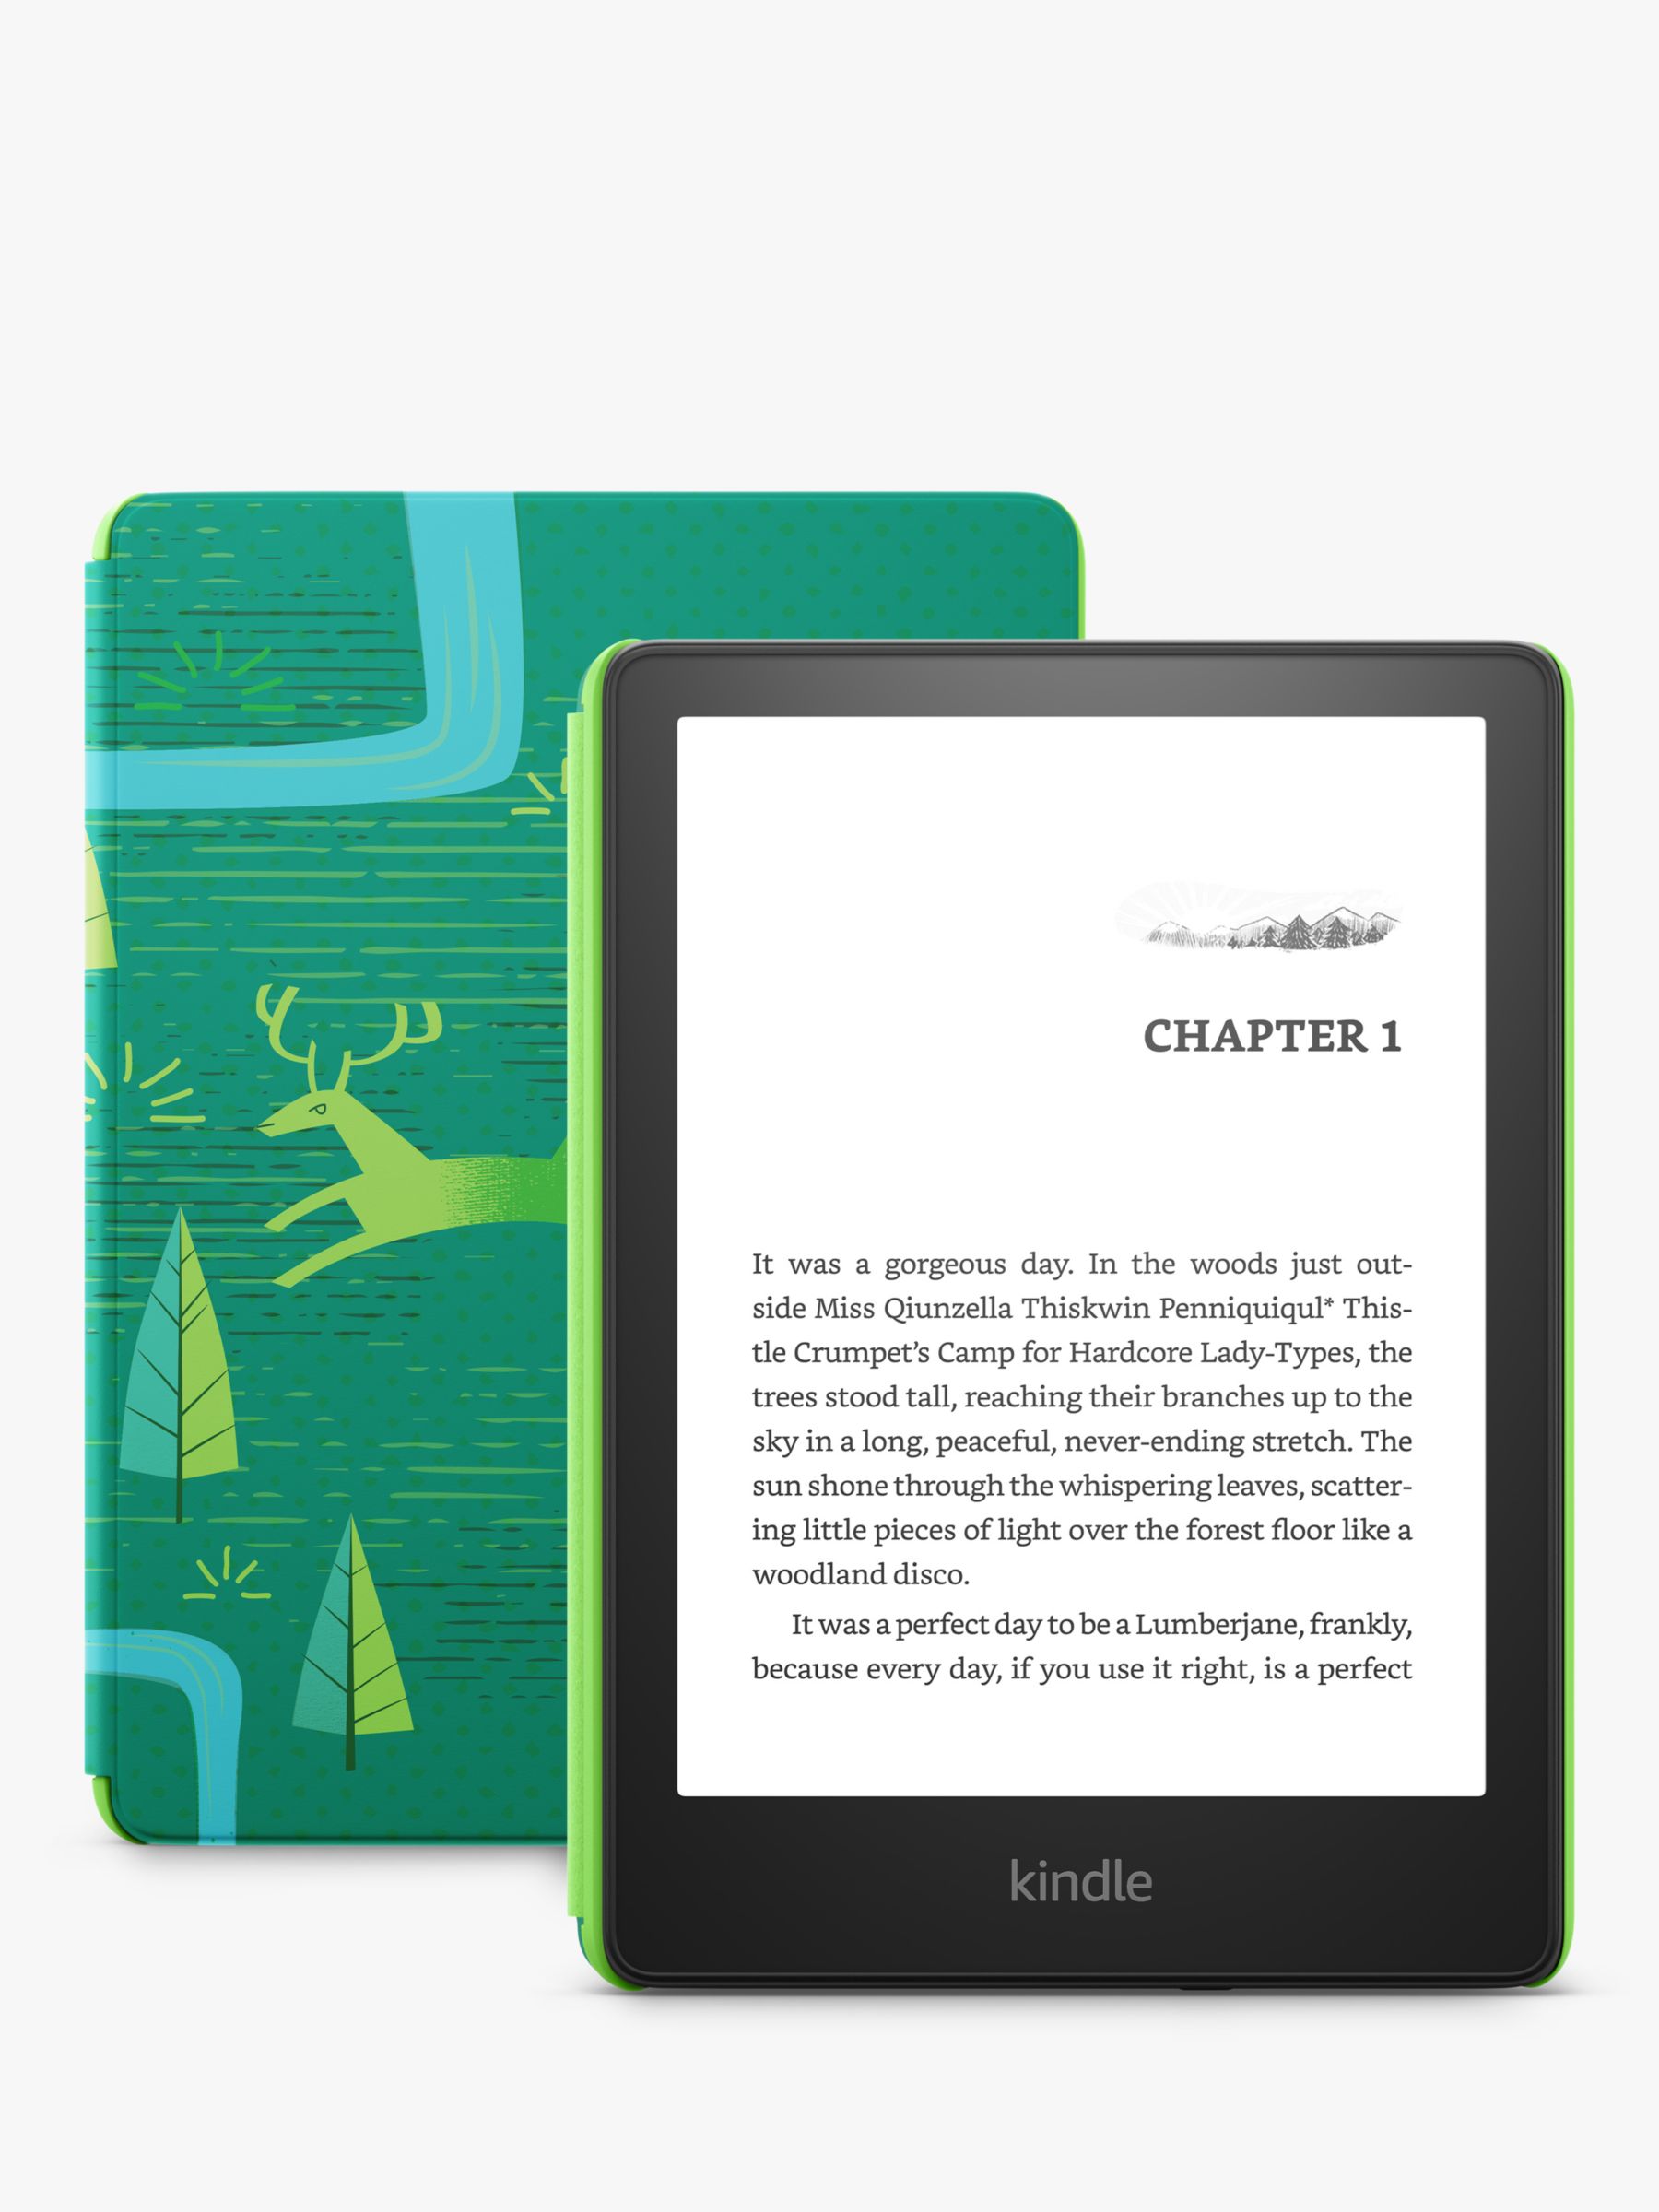 A concept of the next-generation Kindle Paperwhite, plus a feature wishlist  – Ebook Friendly